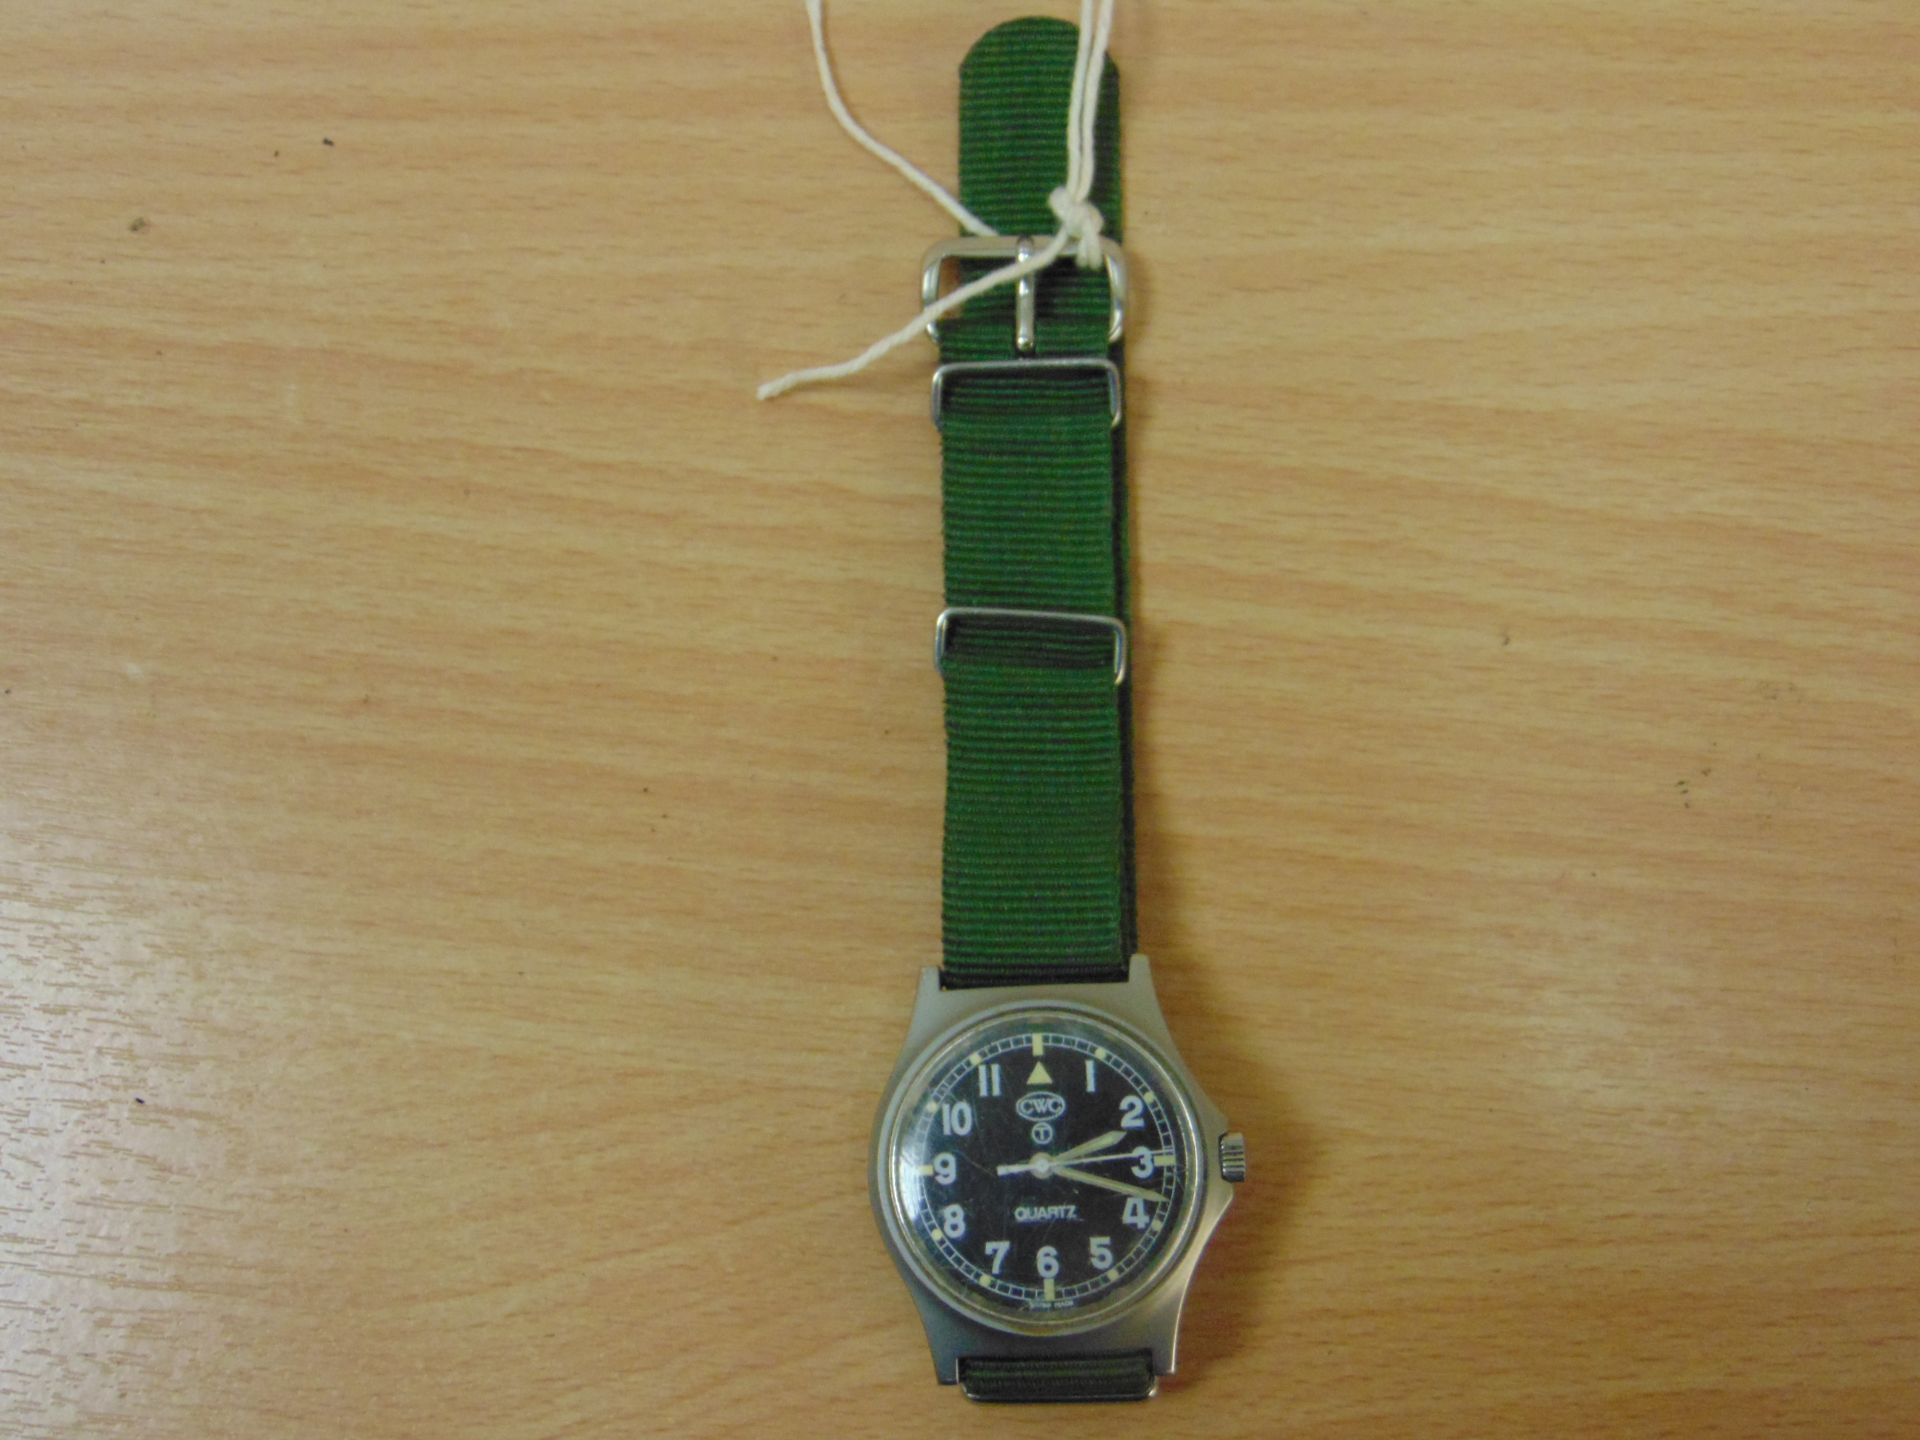 VERY NICE CWC W10 BRITISH ARMY SERVICE WATCH NATO MARKED DATED 1997 - Image 3 of 8